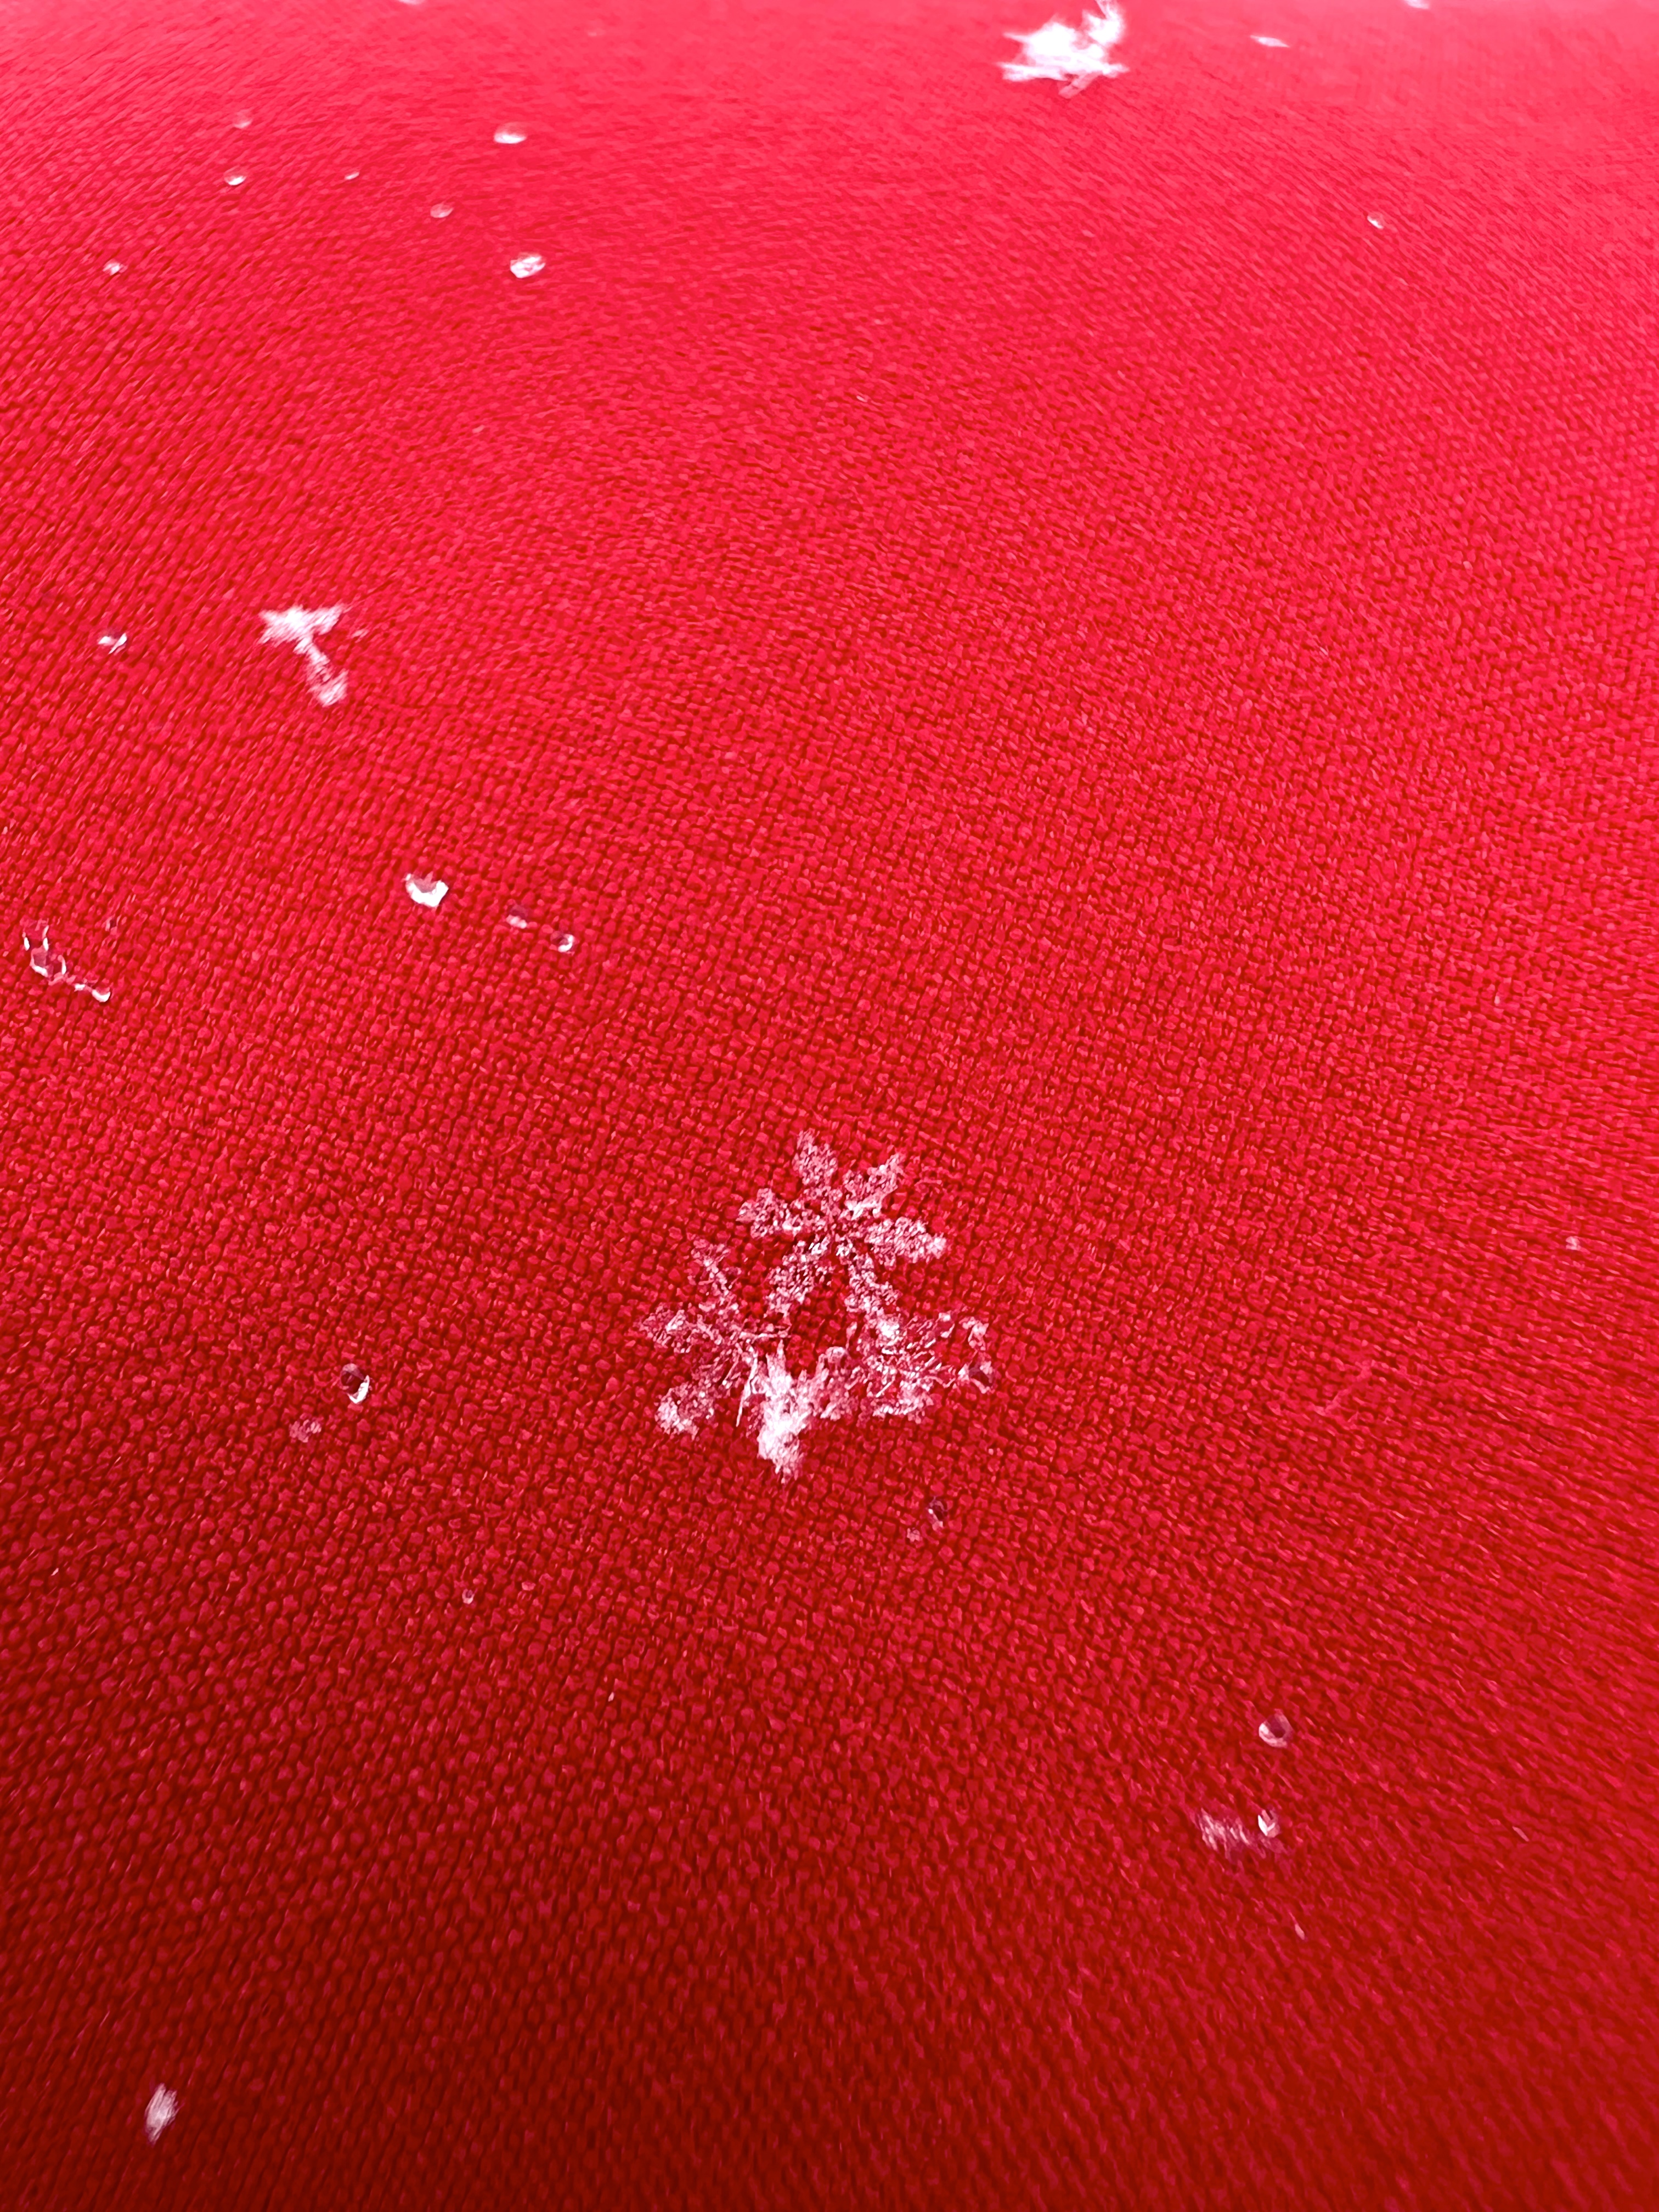 STV's Sean Batty was among a group of international meteorologists geeking out over things such as beautifully formed snowflakes.